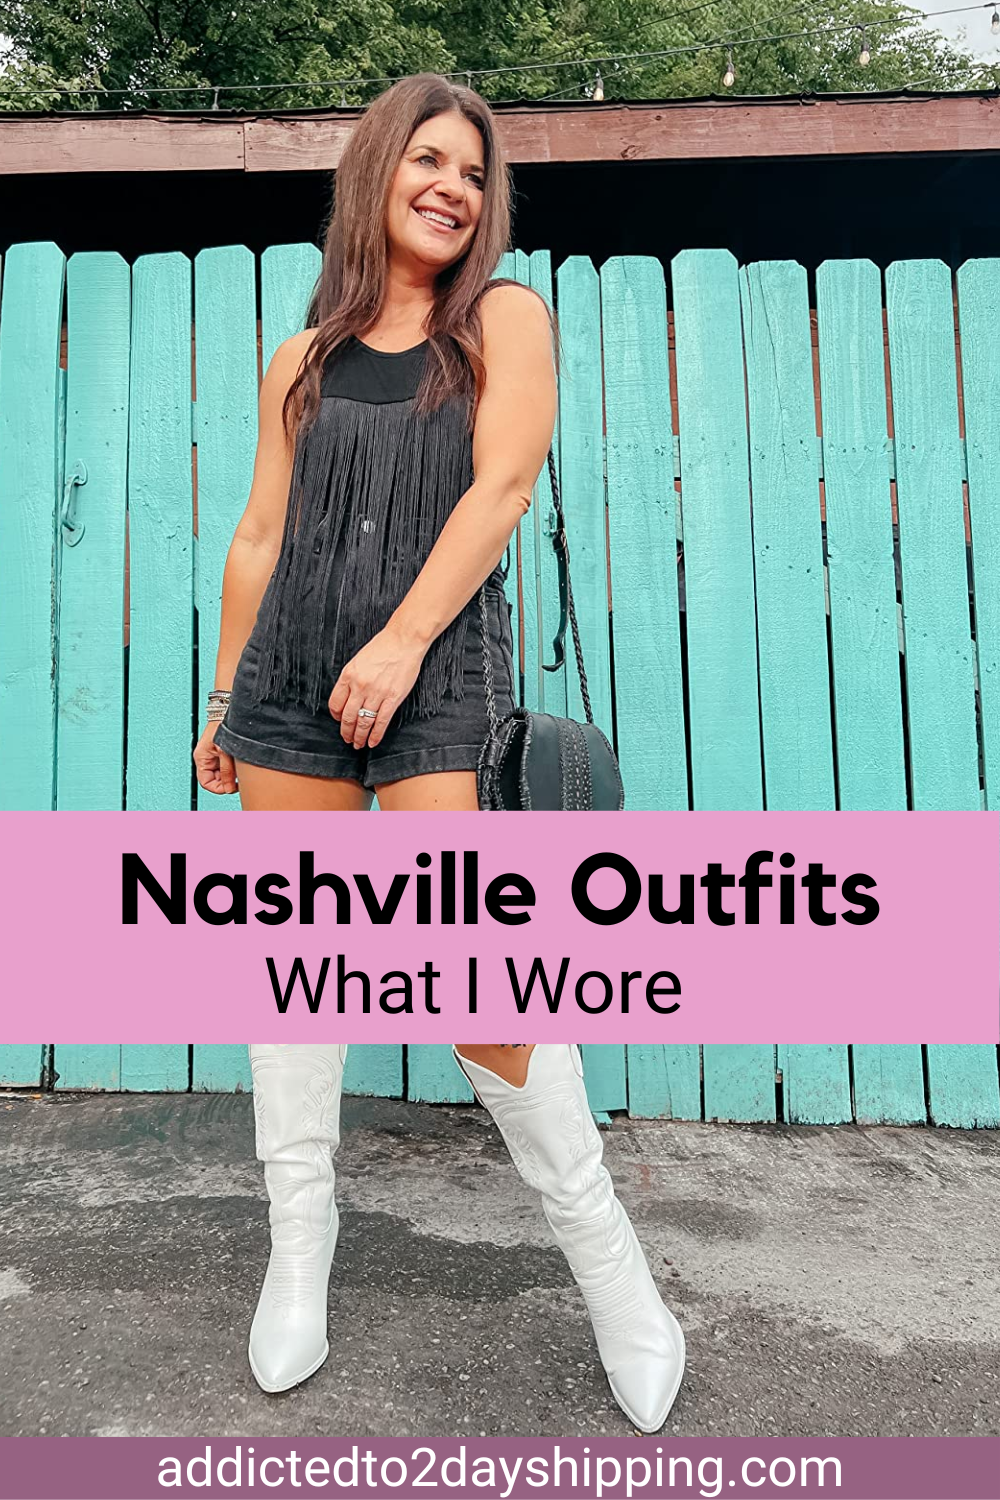 What I Wore in Nashville - Addicted To 2 Day Shipping